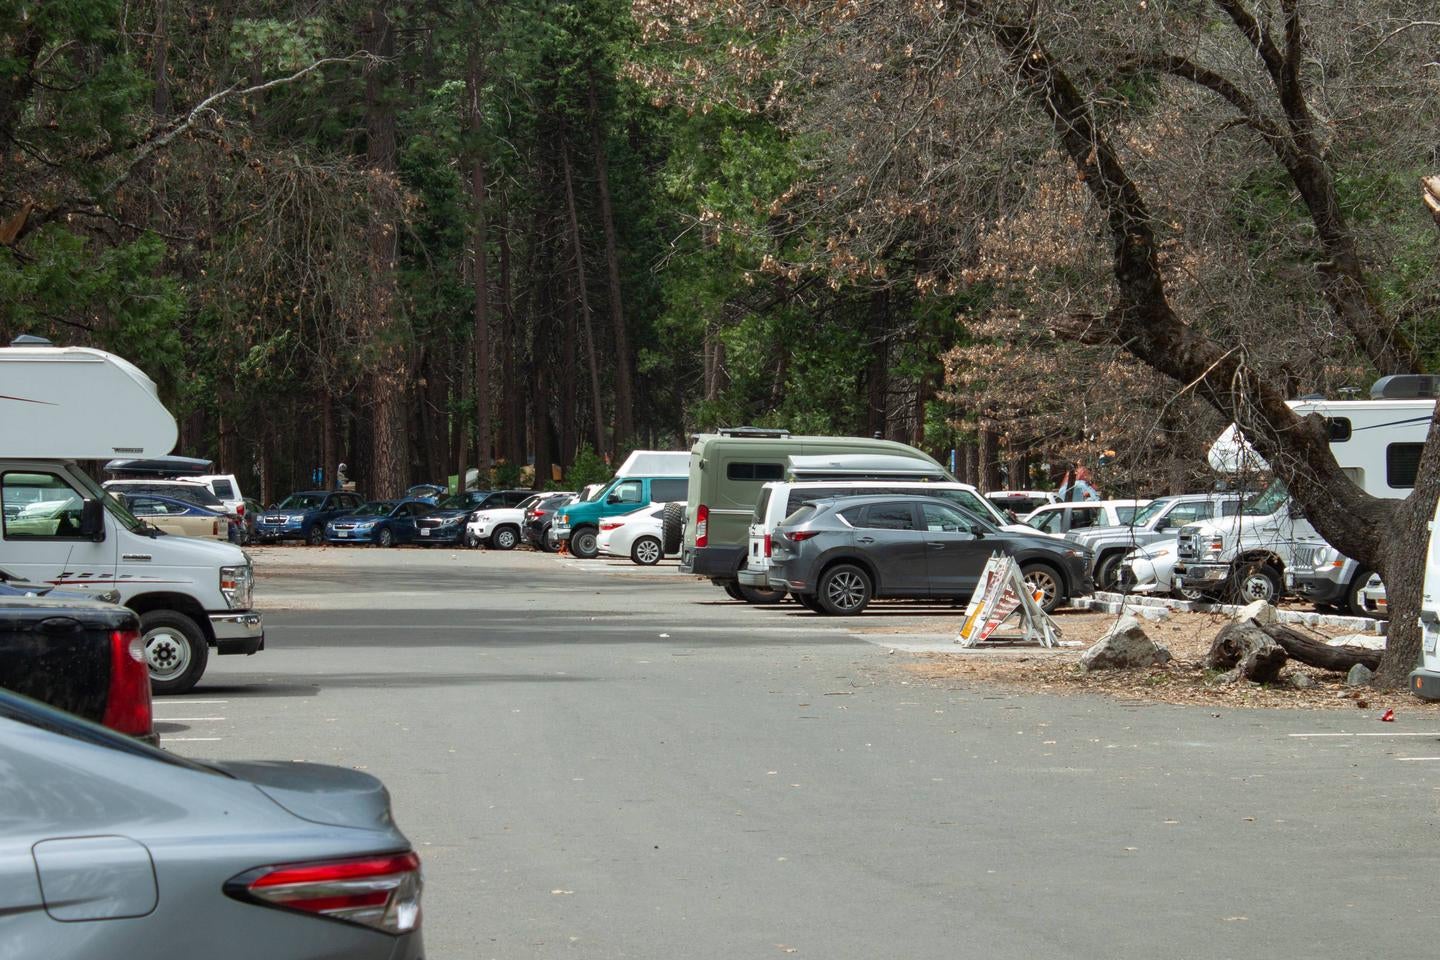 Camp 4 parking lot



This is a photo of the parking lot at Camp 4 campground

Credit: Yosemite National Park